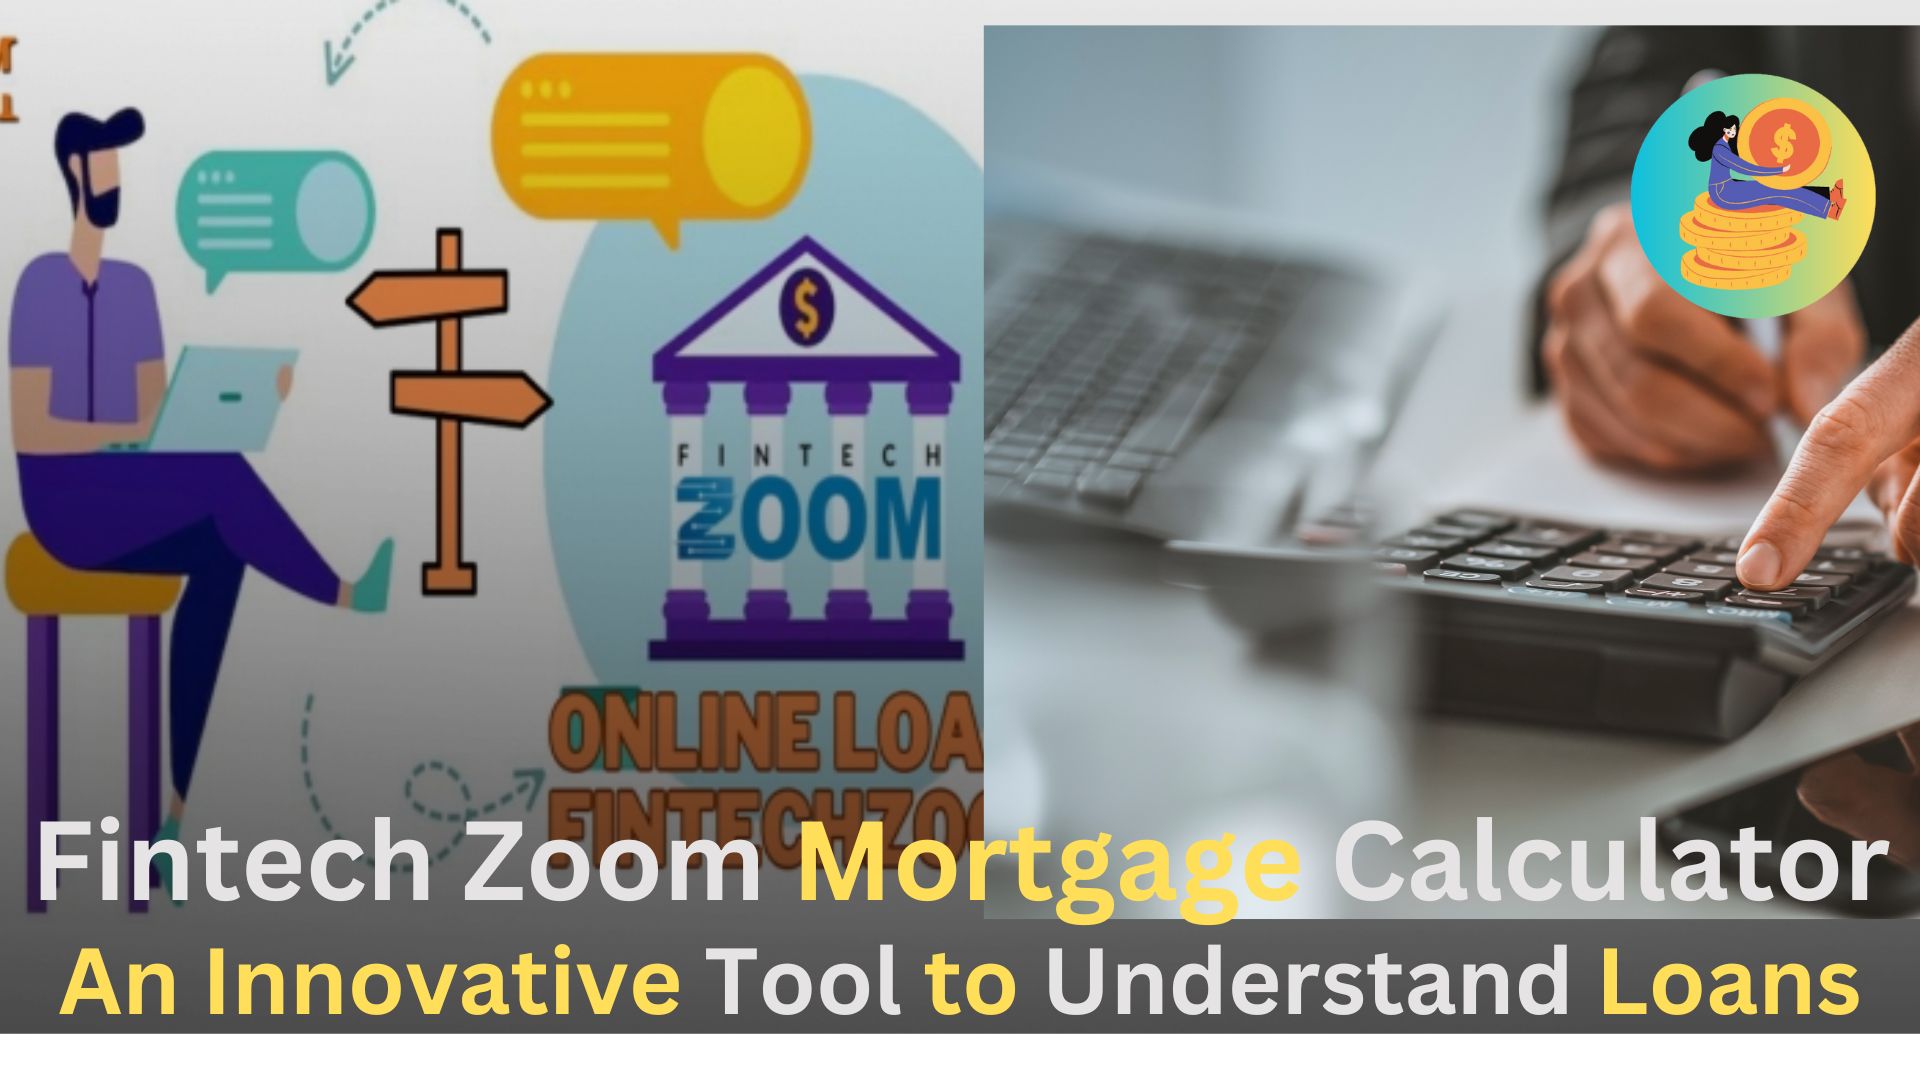 Fintech Zoom Mortgage Calculator,An Innovative Tool to Understand Loans